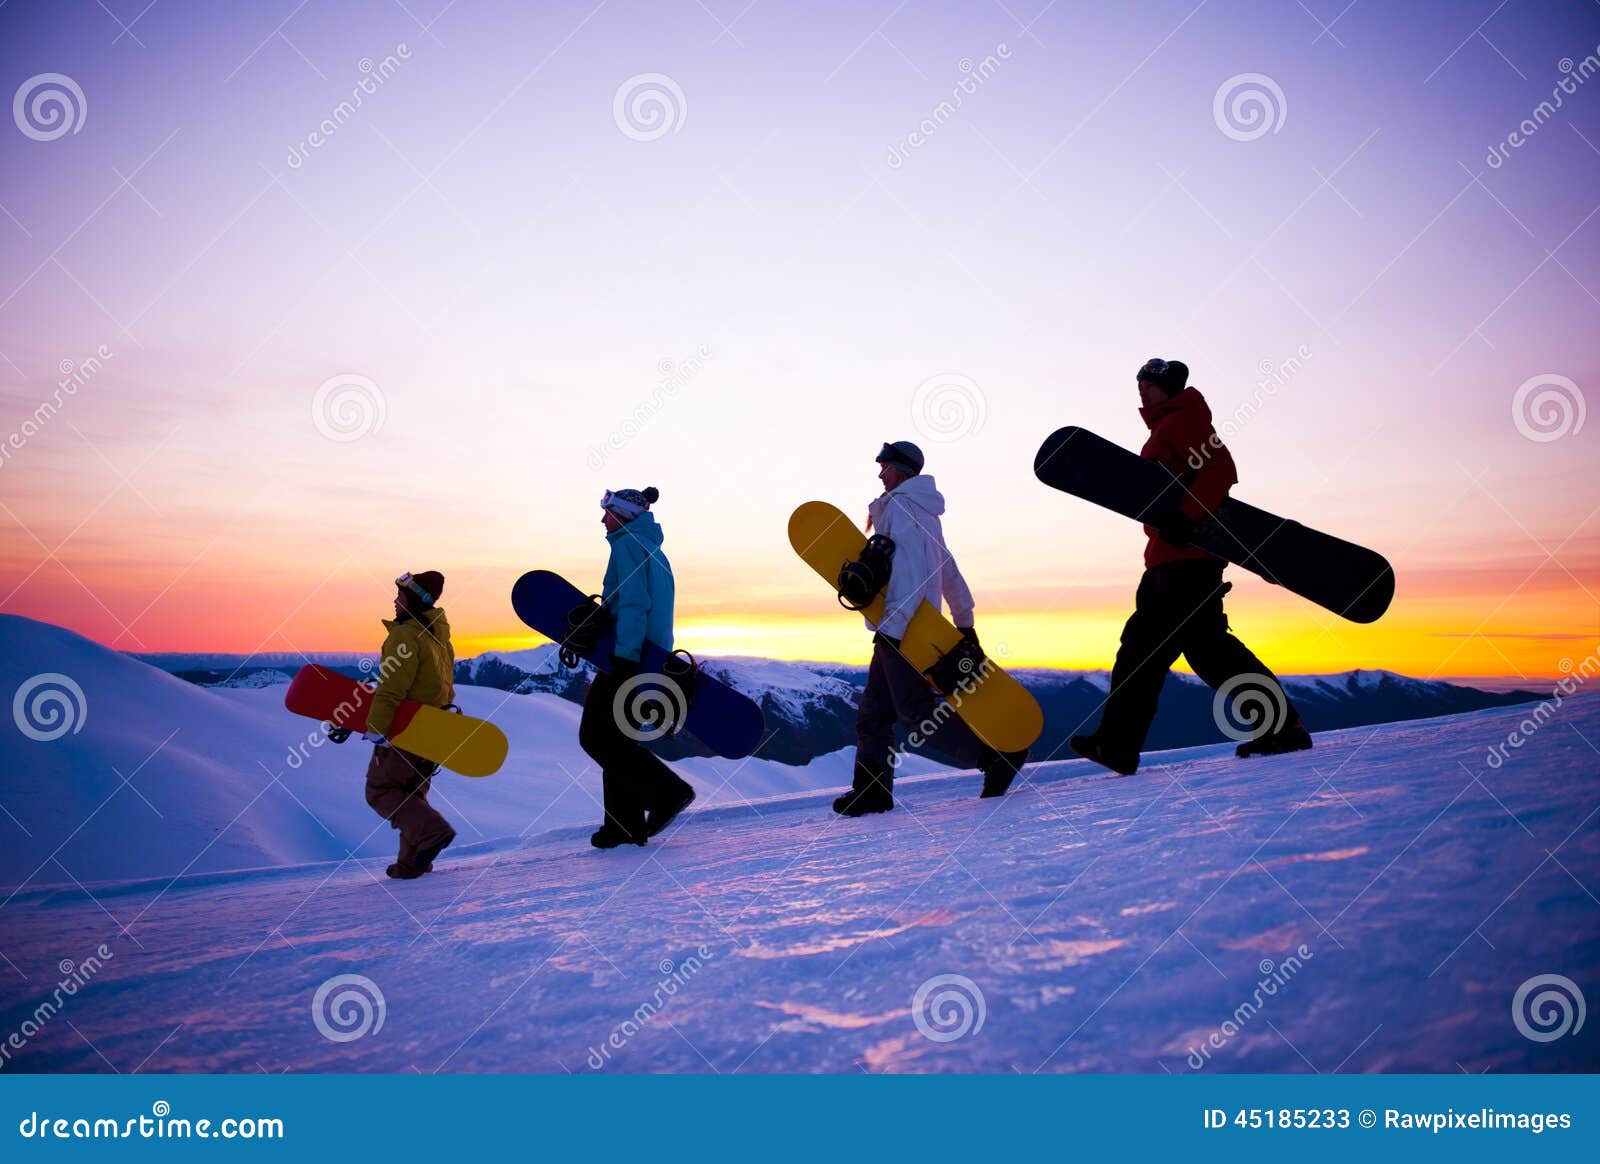 people on their way to snow boarding